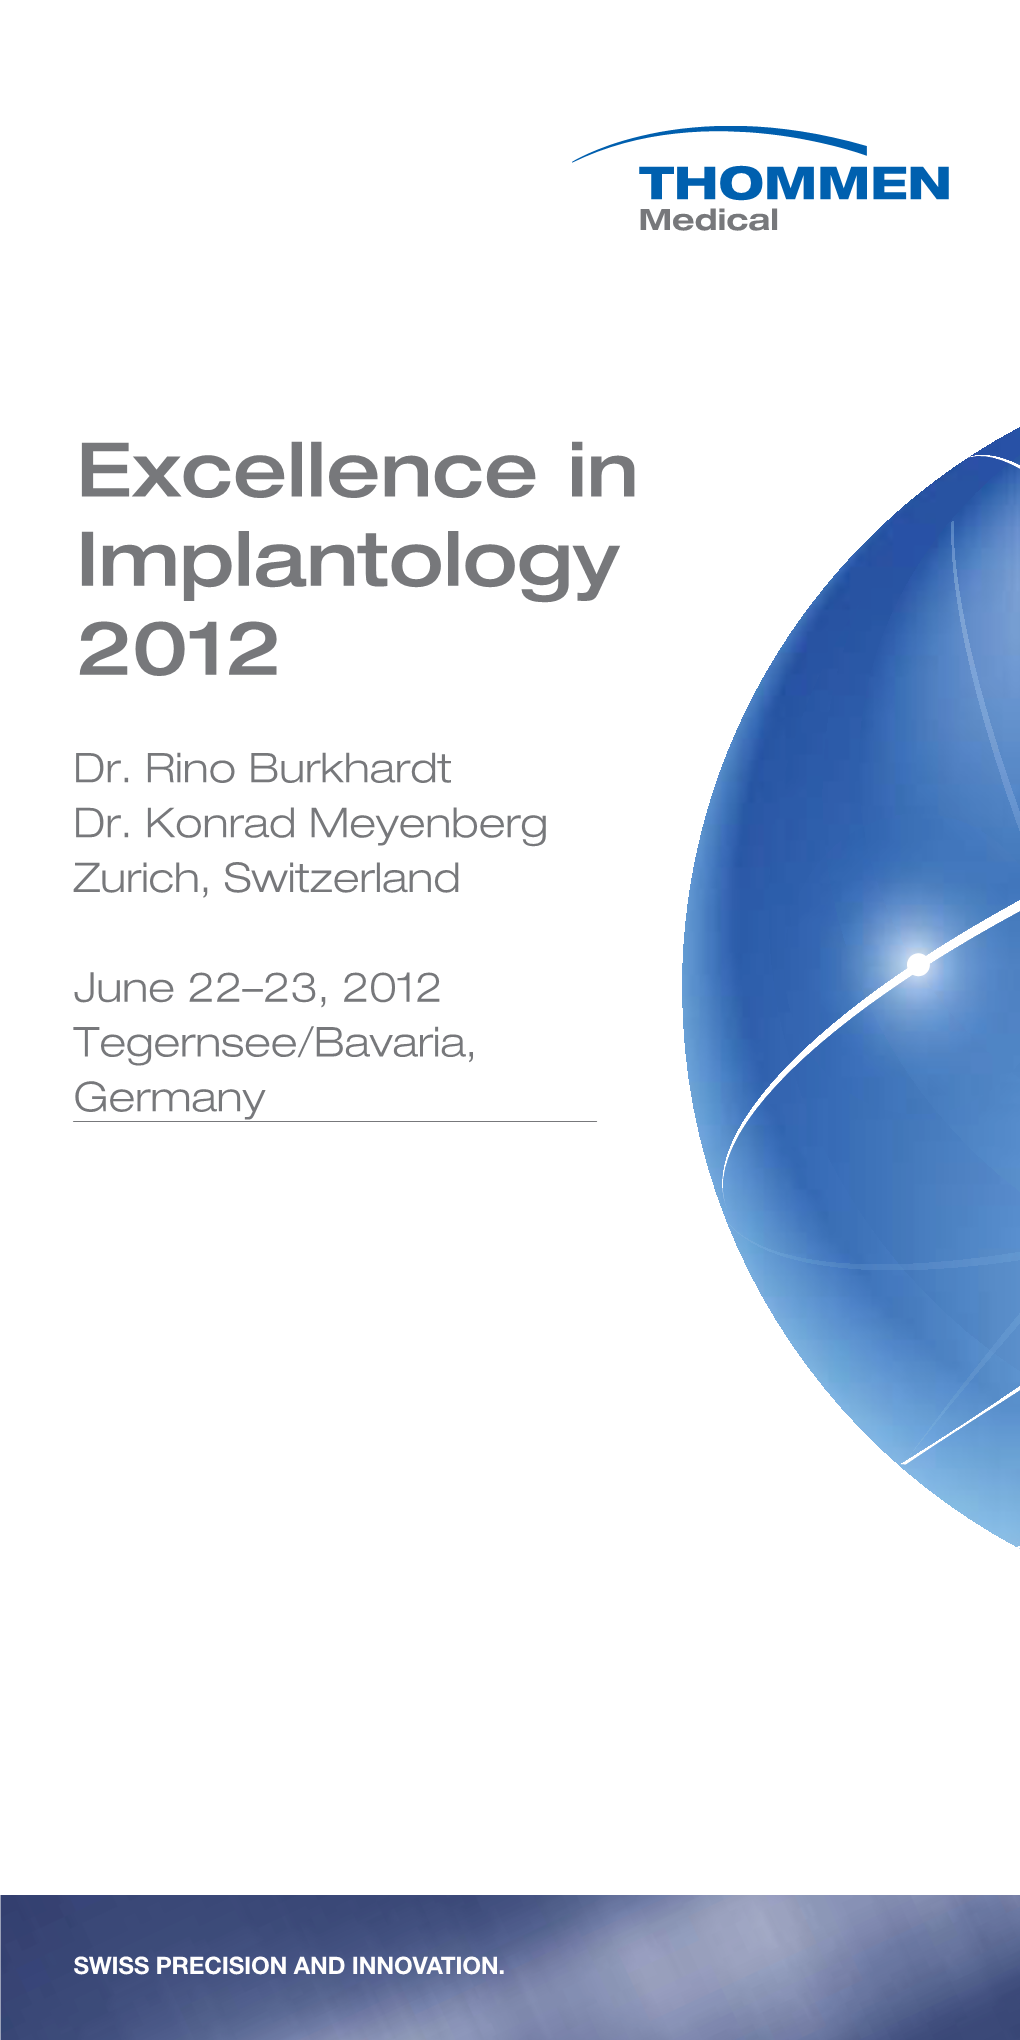 Excellence in Implantology 2012